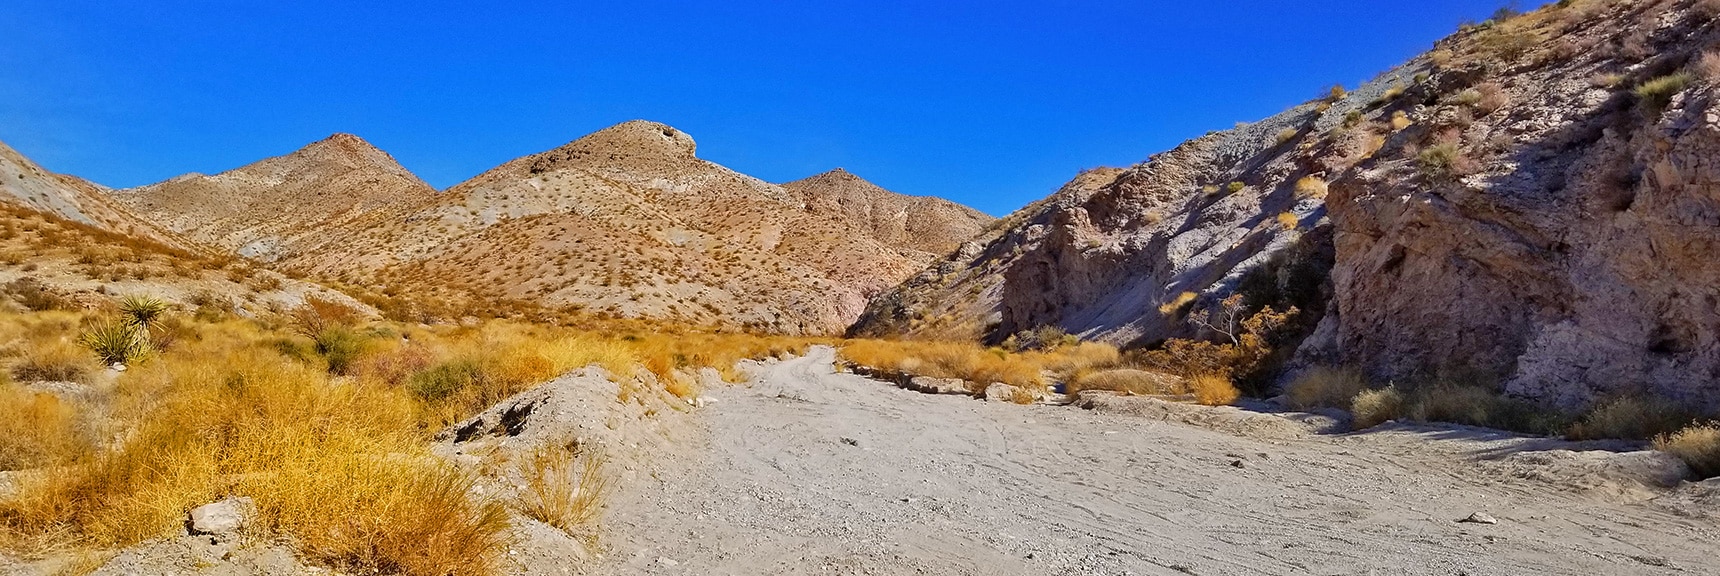 View Up Fortification Hill Road. Gravel Becomes Too Deep for Mountain Bike. | Fortification Hill | Lake Mead National Recreation Area, Arizona